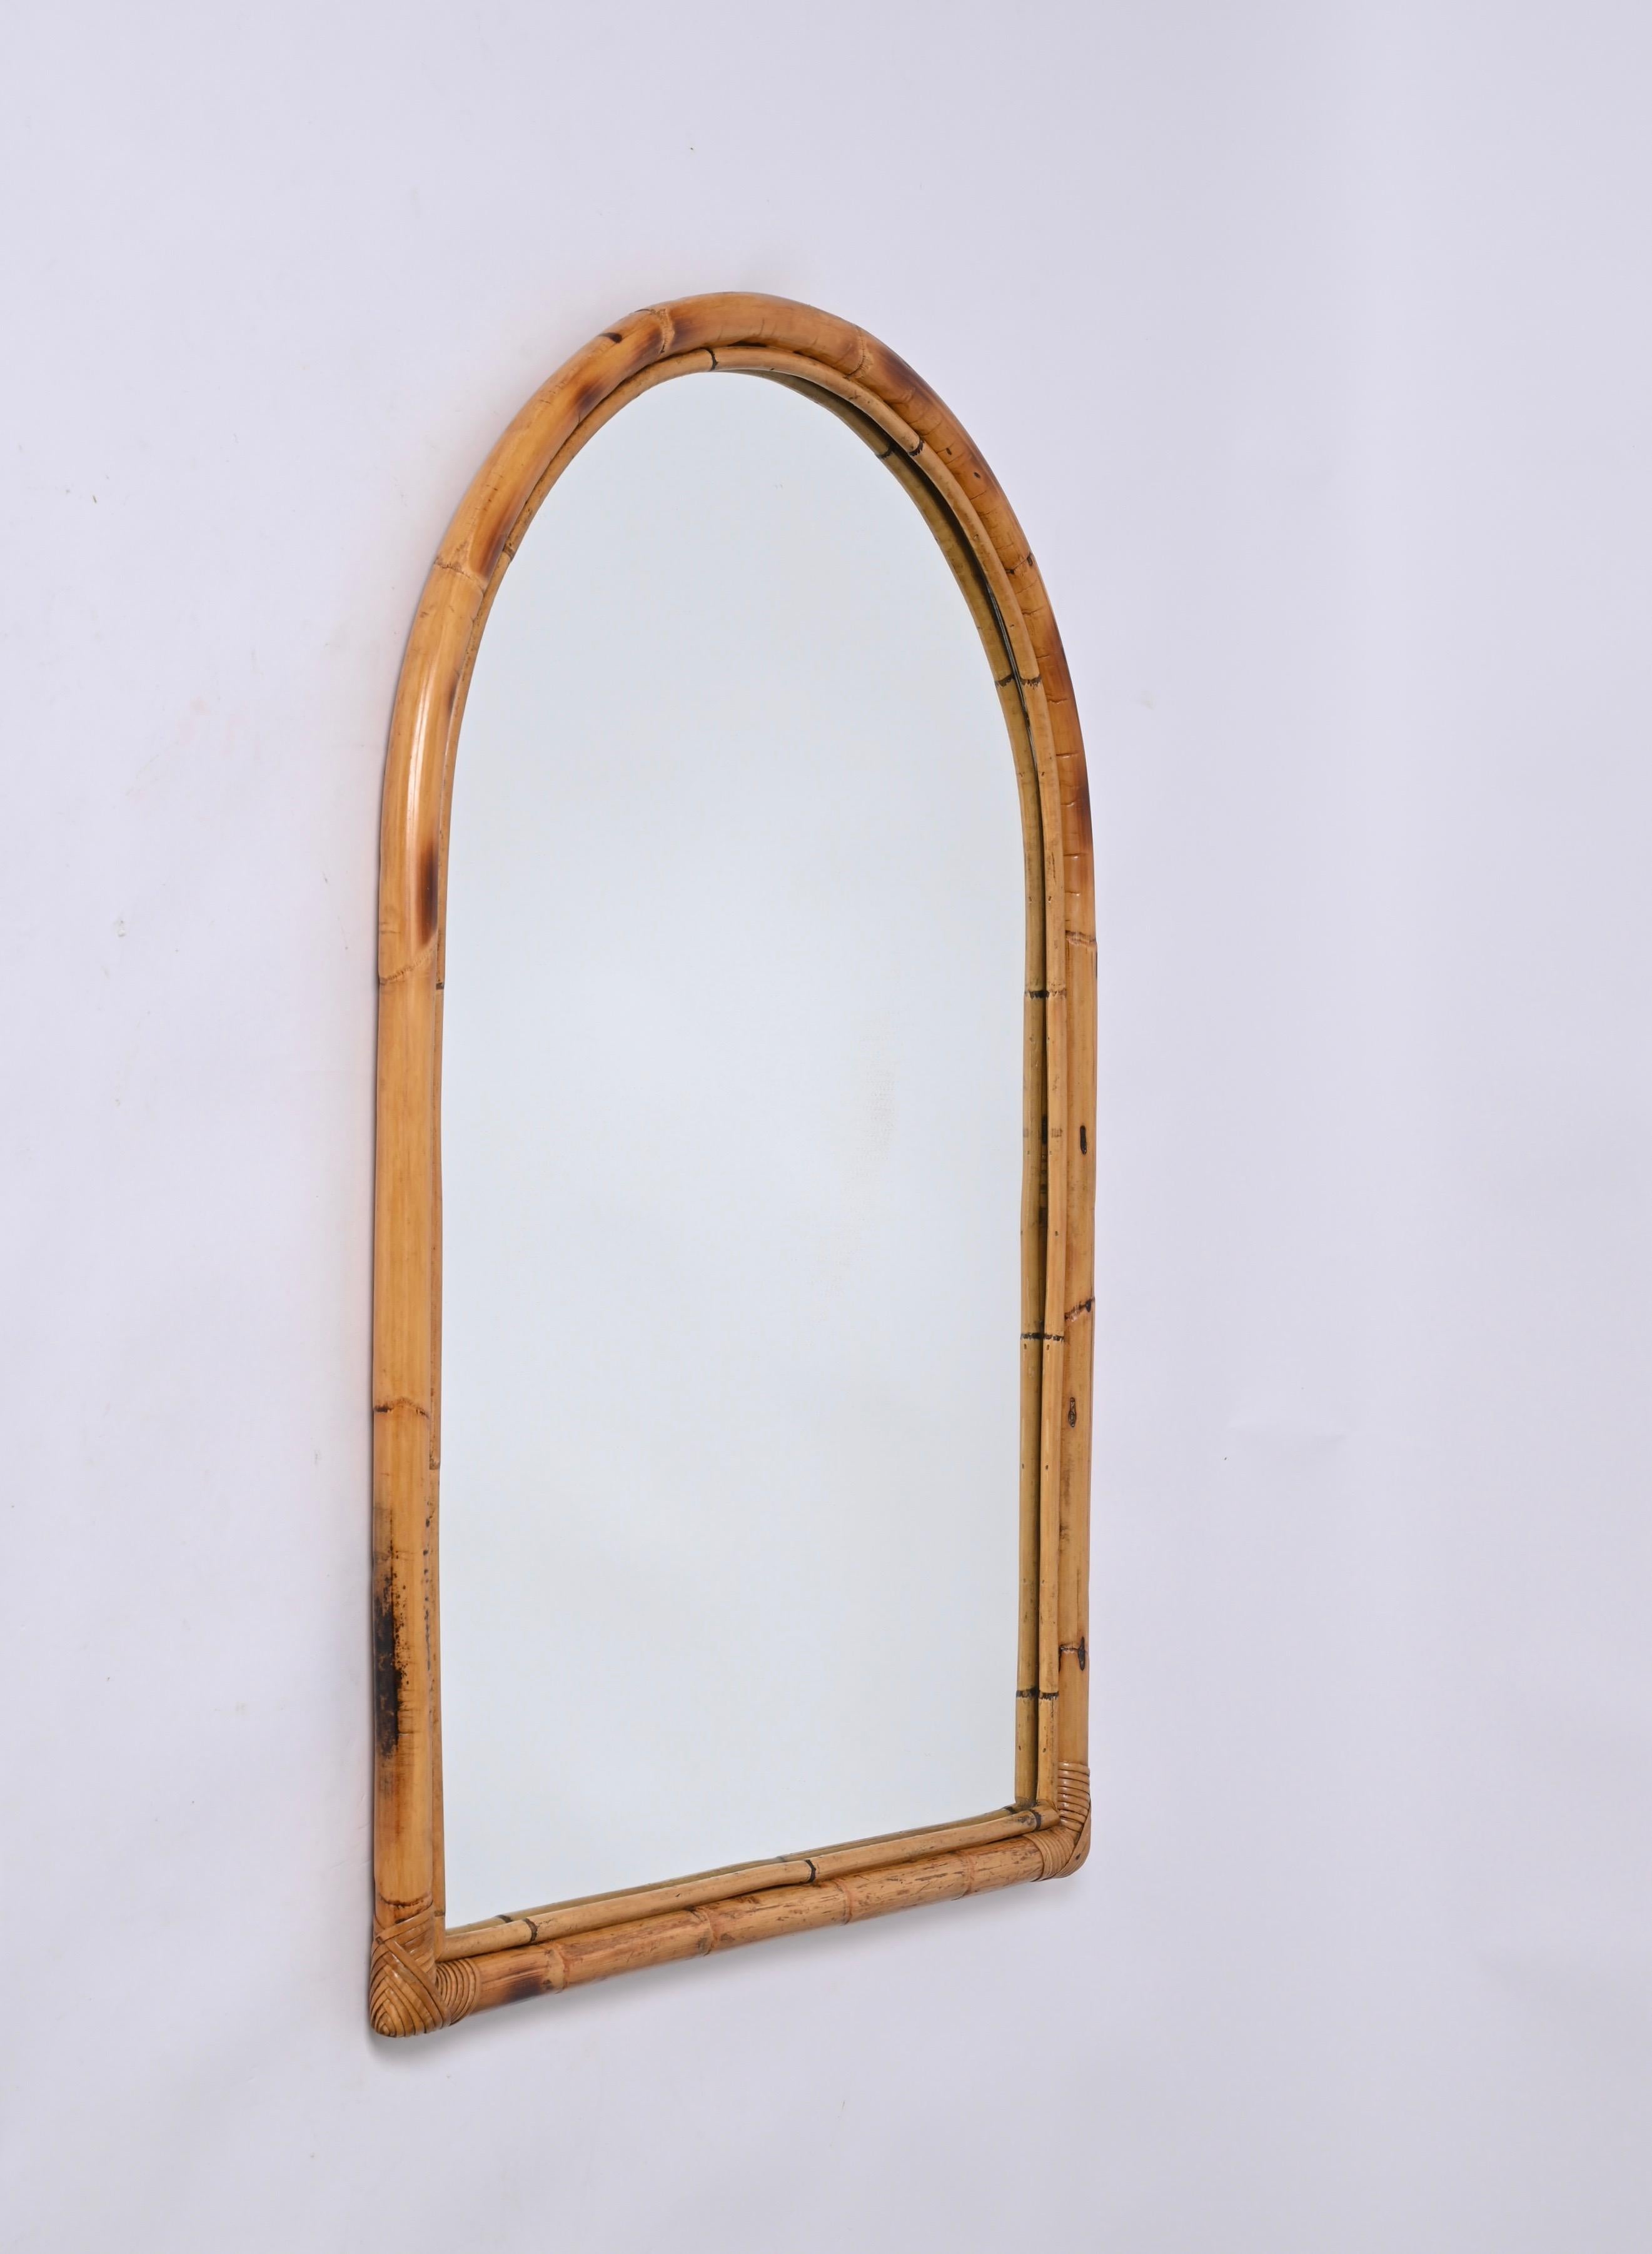 Midcentury Italian Arch Mirror with Double Bamboo and Rattan Frame, Italy, 1970s For Sale 7